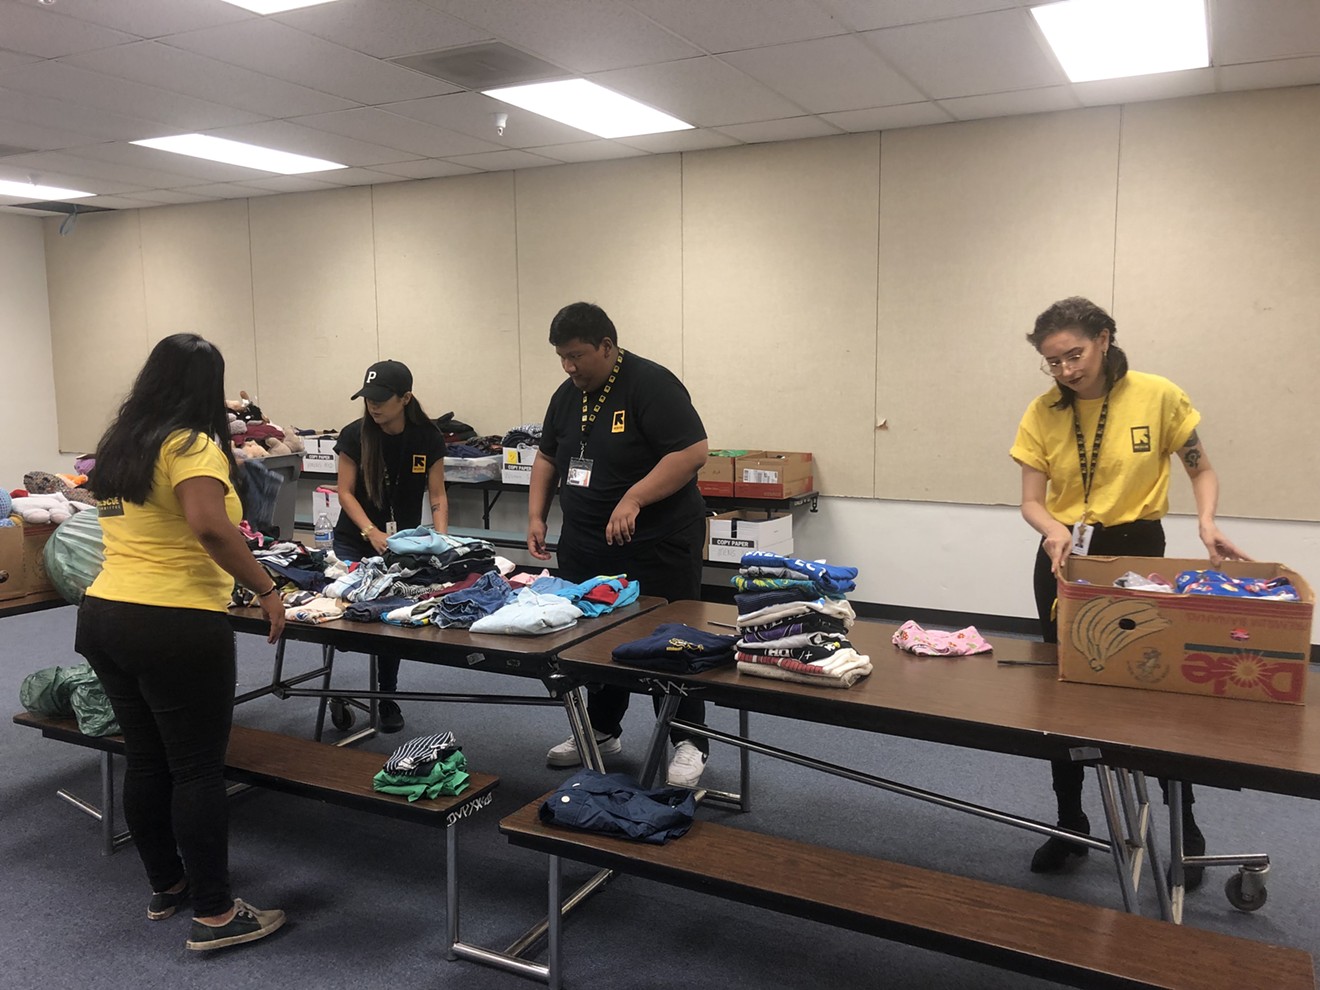 International Rescue Committee volunteers sort through clothing donations ahead of the arrival of 70 migrants. Most of the clothing was given by individual donors or church groups.